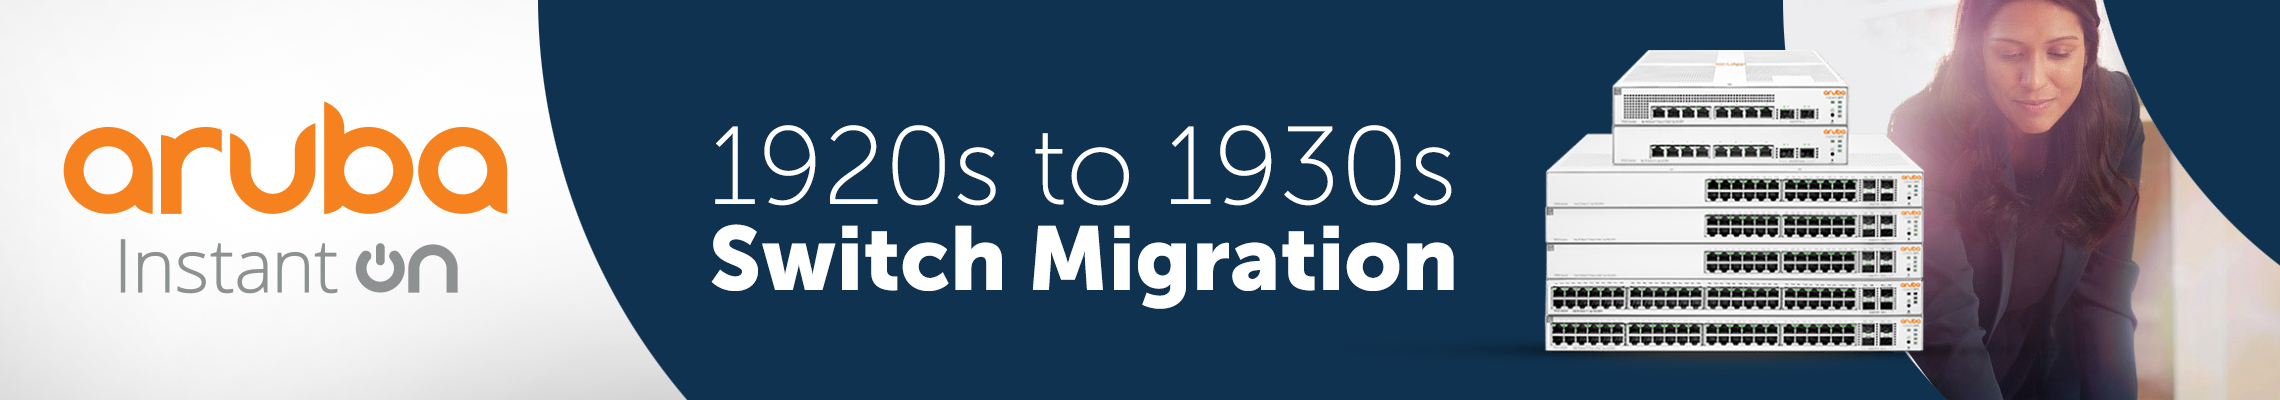 Aruba 1920s to 1930 Switch Migration banner